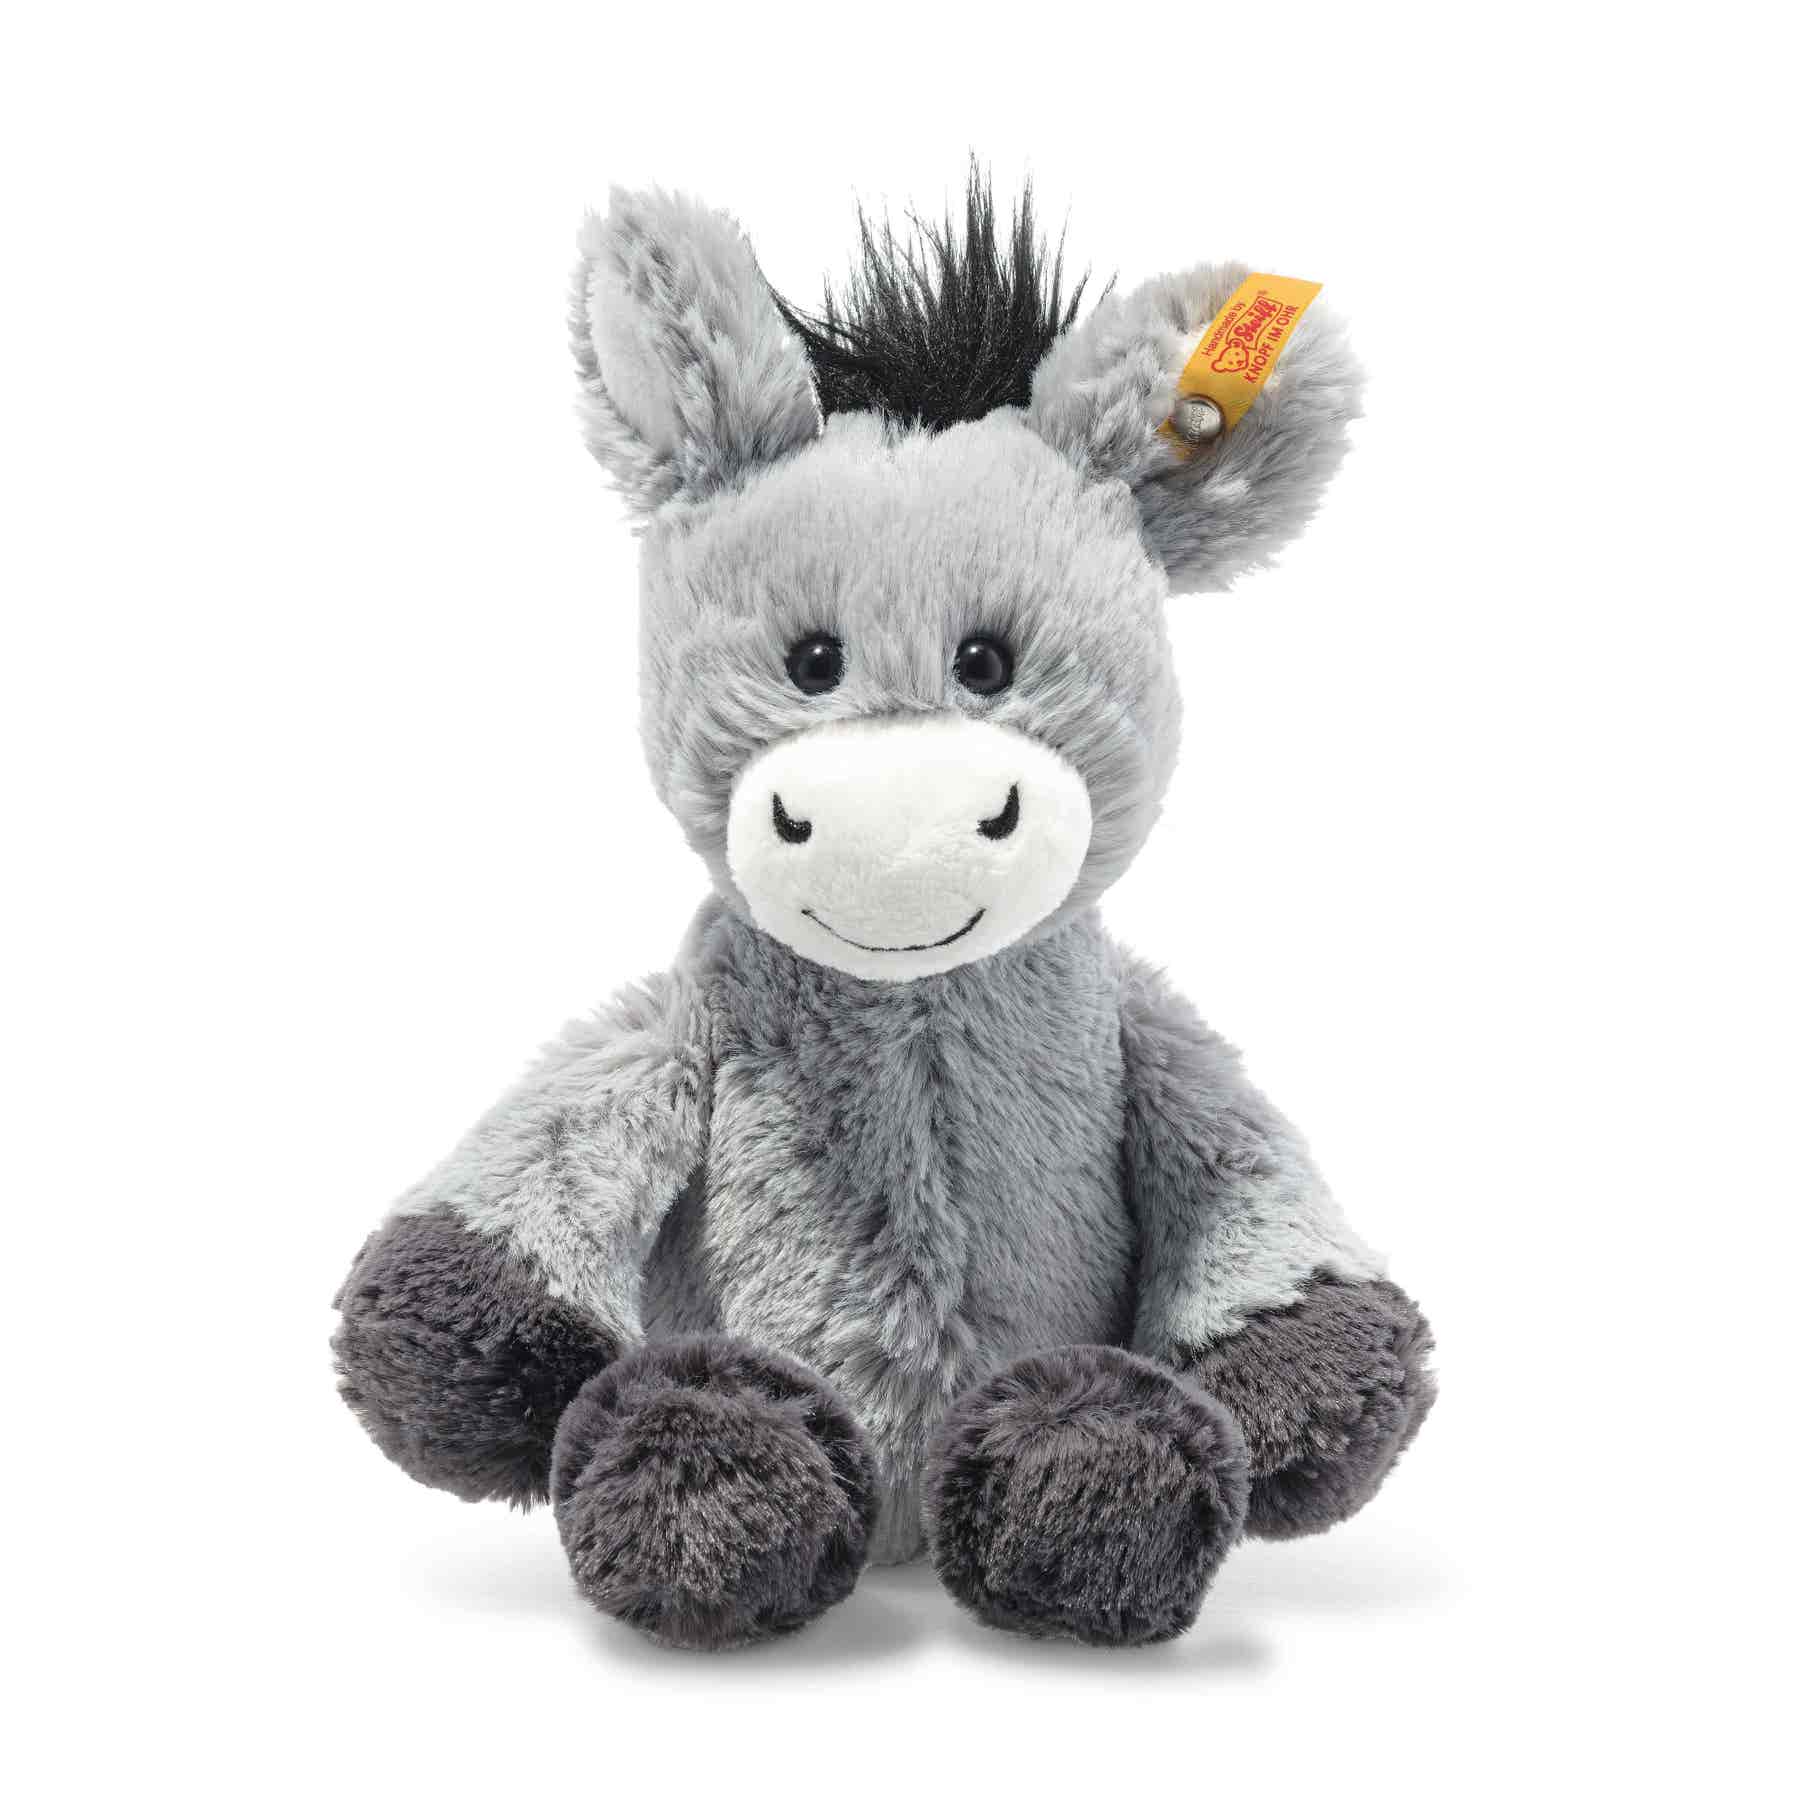 This dinky donkey is a real softy. It’s made from cuddly soft grey/blue plush fabric, with the most delightful face and cute black mop on its head